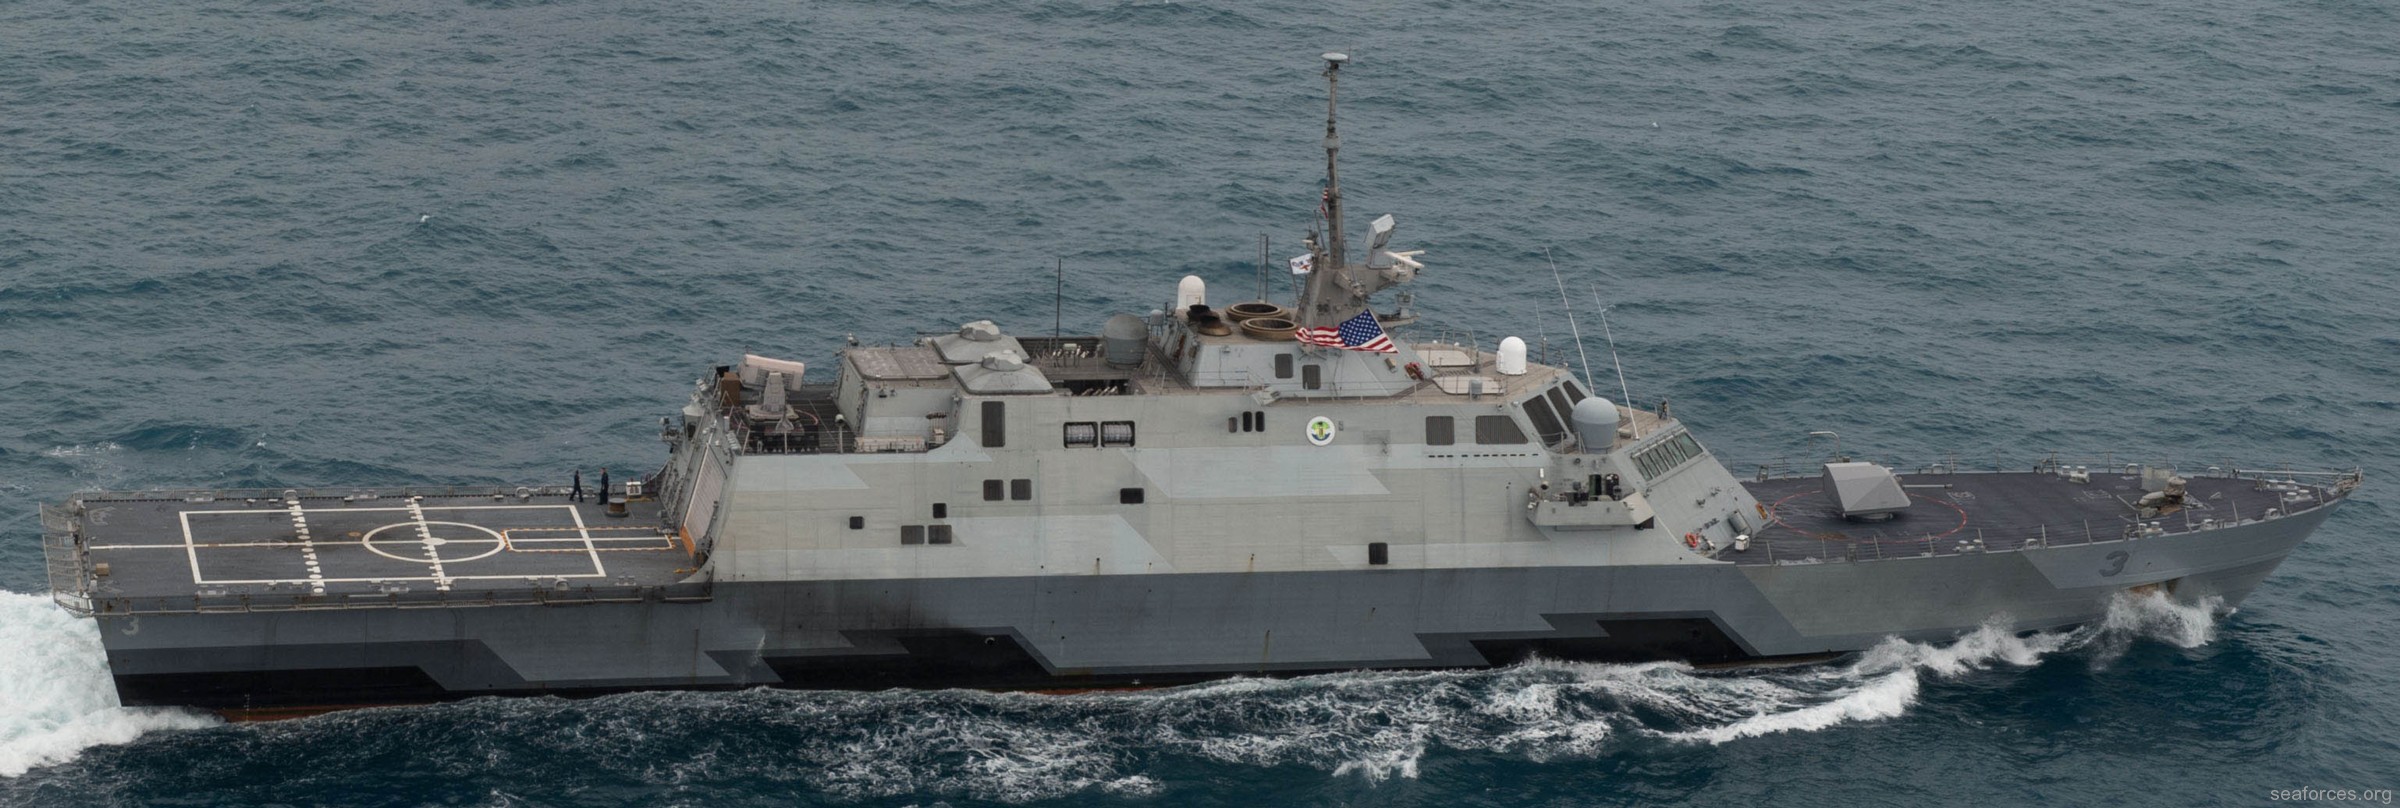 lcs-3 uss fort worth littoral combat ship freedom class us navy 24